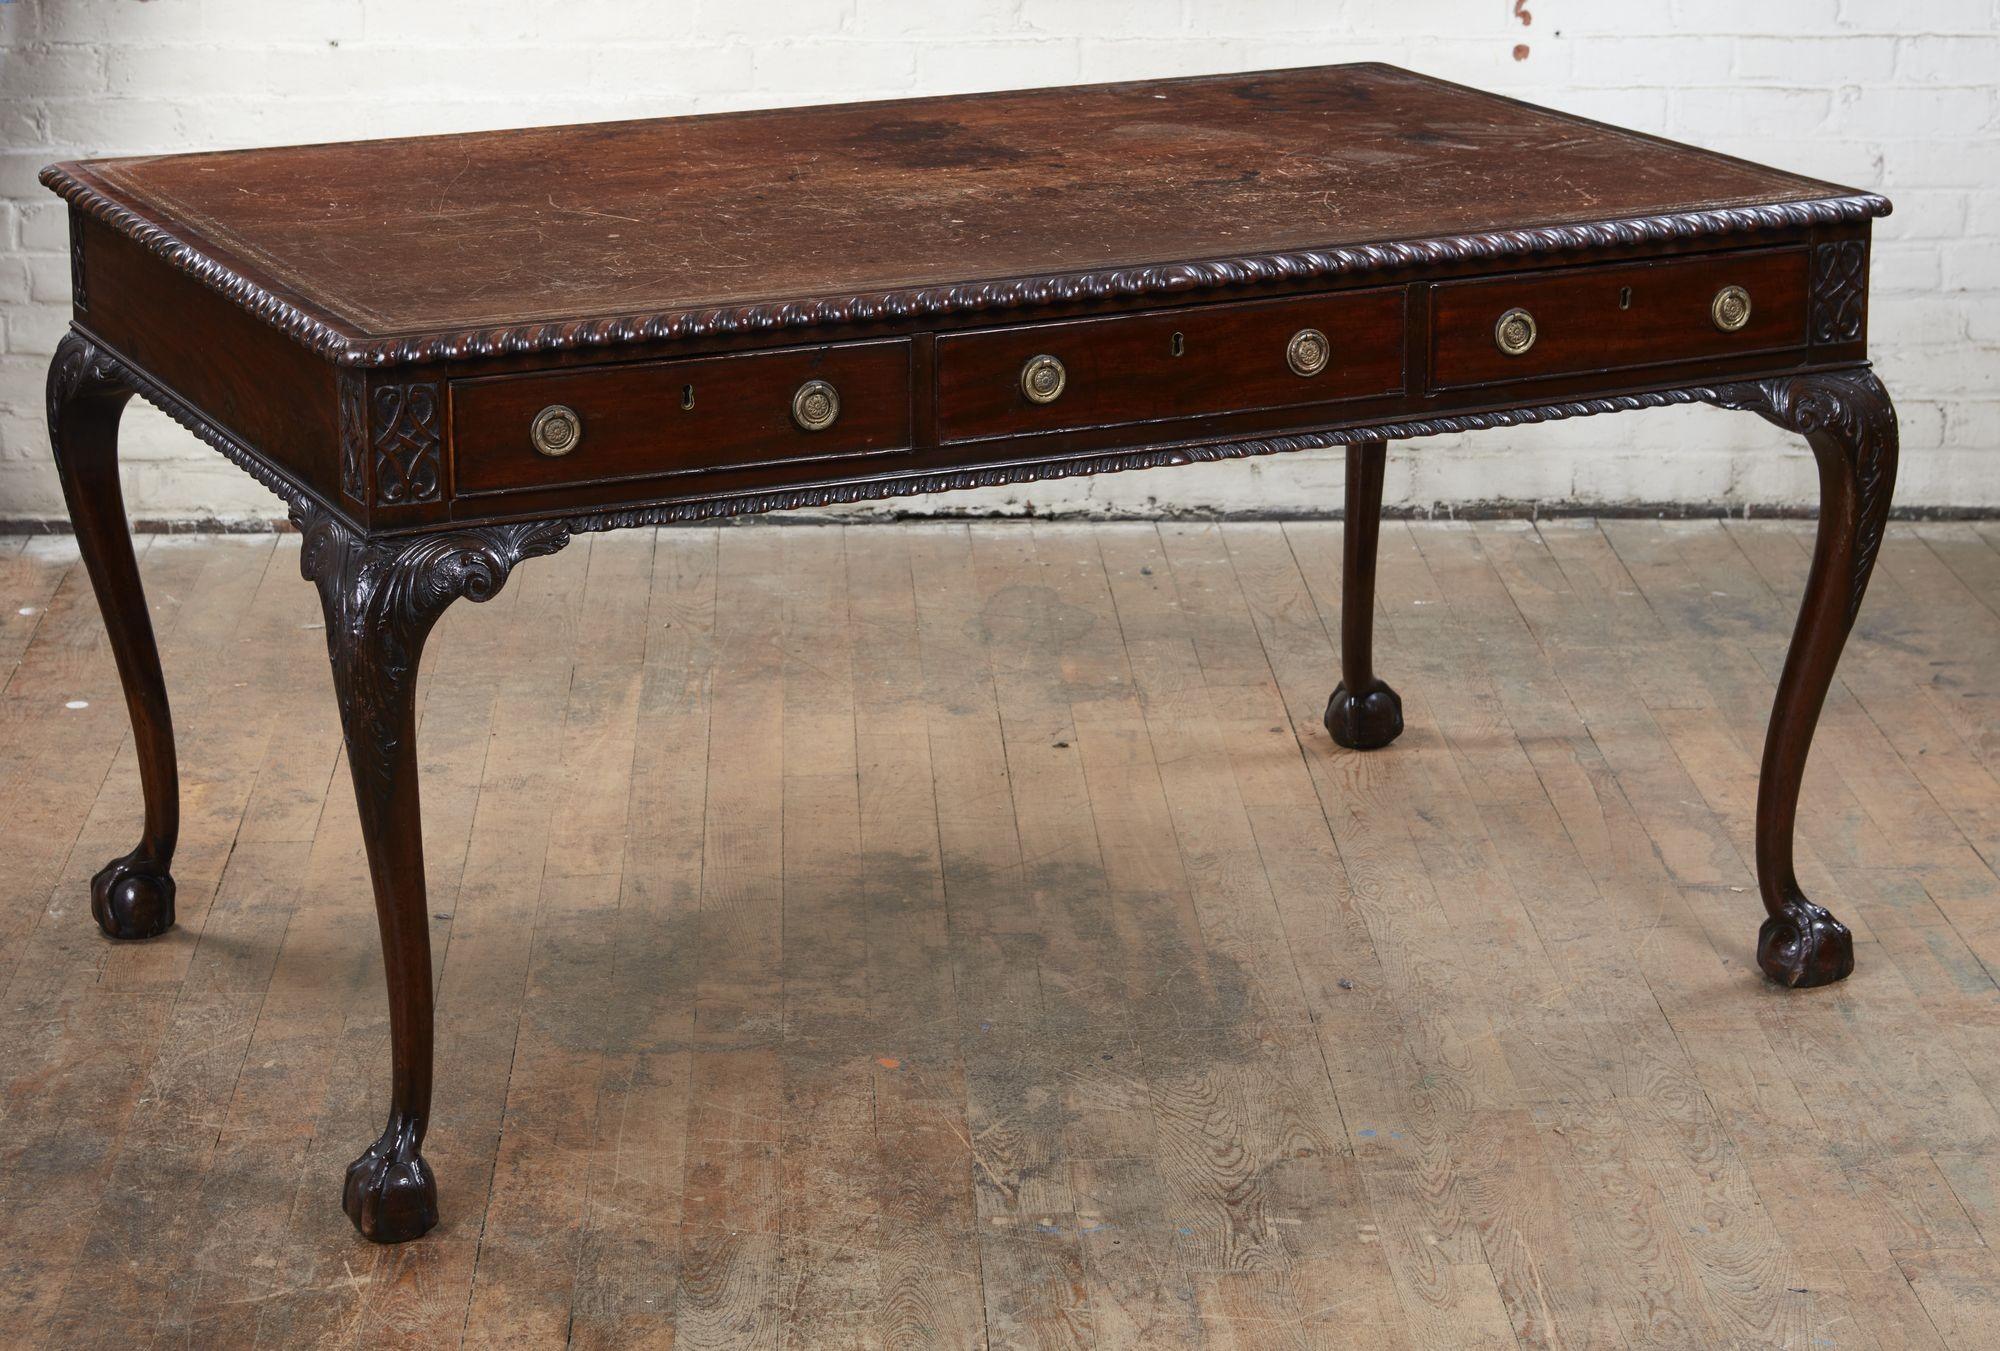 Very fine George II mahogany writing table, the leather-lined top with gilt tooling and banded edge, the edge with rich gadroon carving, over three drawers, standing on boldly carved cabriole legs with acanthus leaf knees and ball and claw feet, the